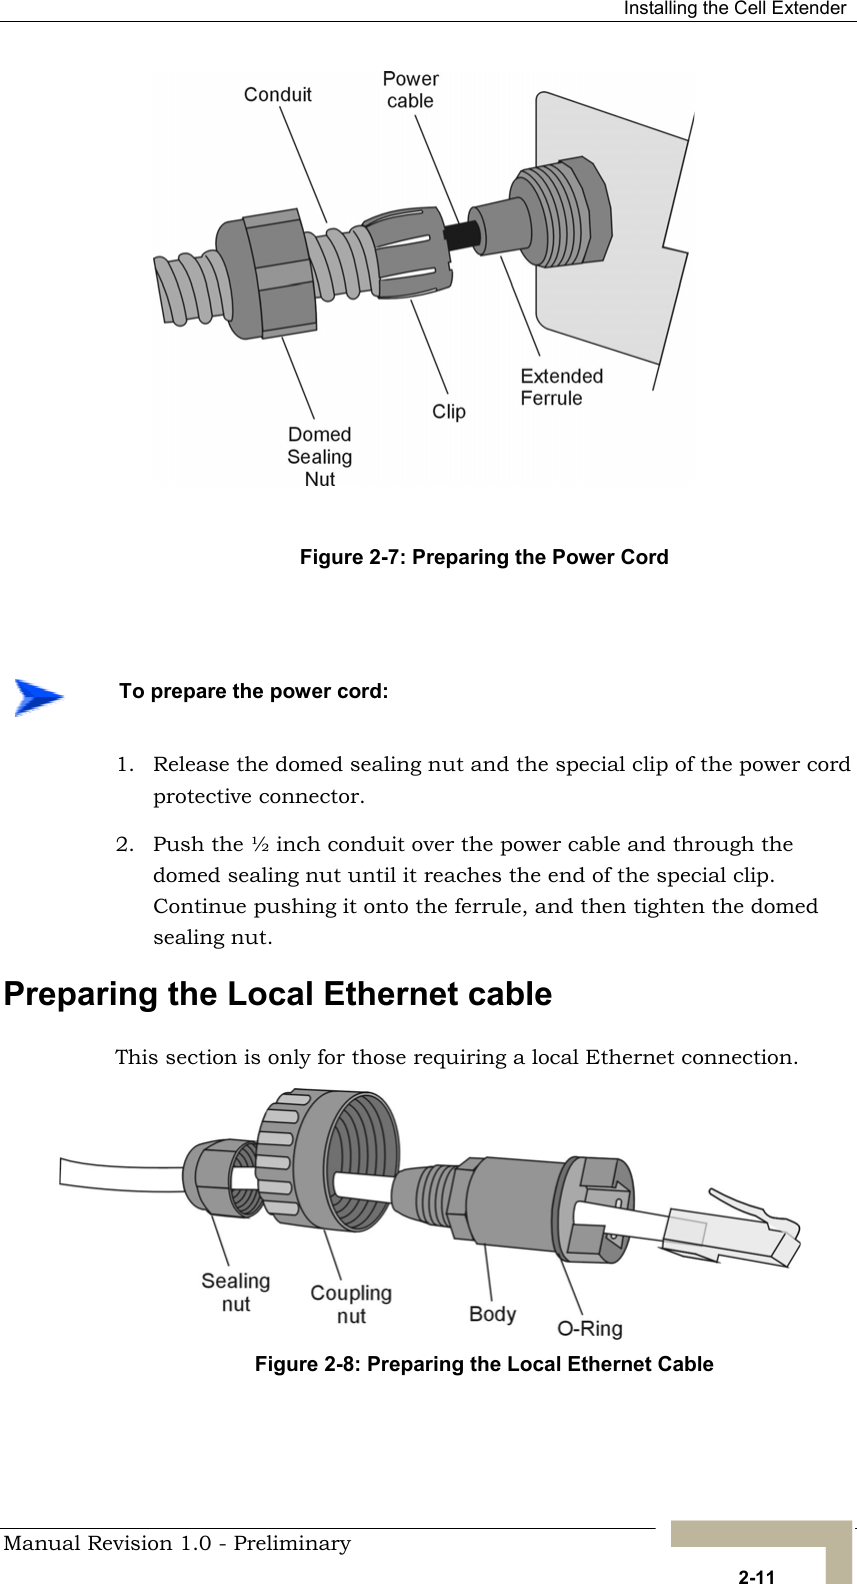  Installing the Cell Extender  Figure 2-7: Preparing the Power Cord     To prepare the power cord: 1.  Release the domed sealing nut and the special clip of the power cord protective connector. 2.  Push the ½ inch conduit over the power cable and through the domed sealing nut until it reaches the end of the special clip. Continue pushing it onto the ferrule, and then tighten the domed sealing nut. Preparing the Local Ethernet cable This section is only for those requiring a local Ethernet connection. Figure 2-8: Preparing the Local Ethernet Cable   Manual Revision 1.0 - Preliminary   2-11 